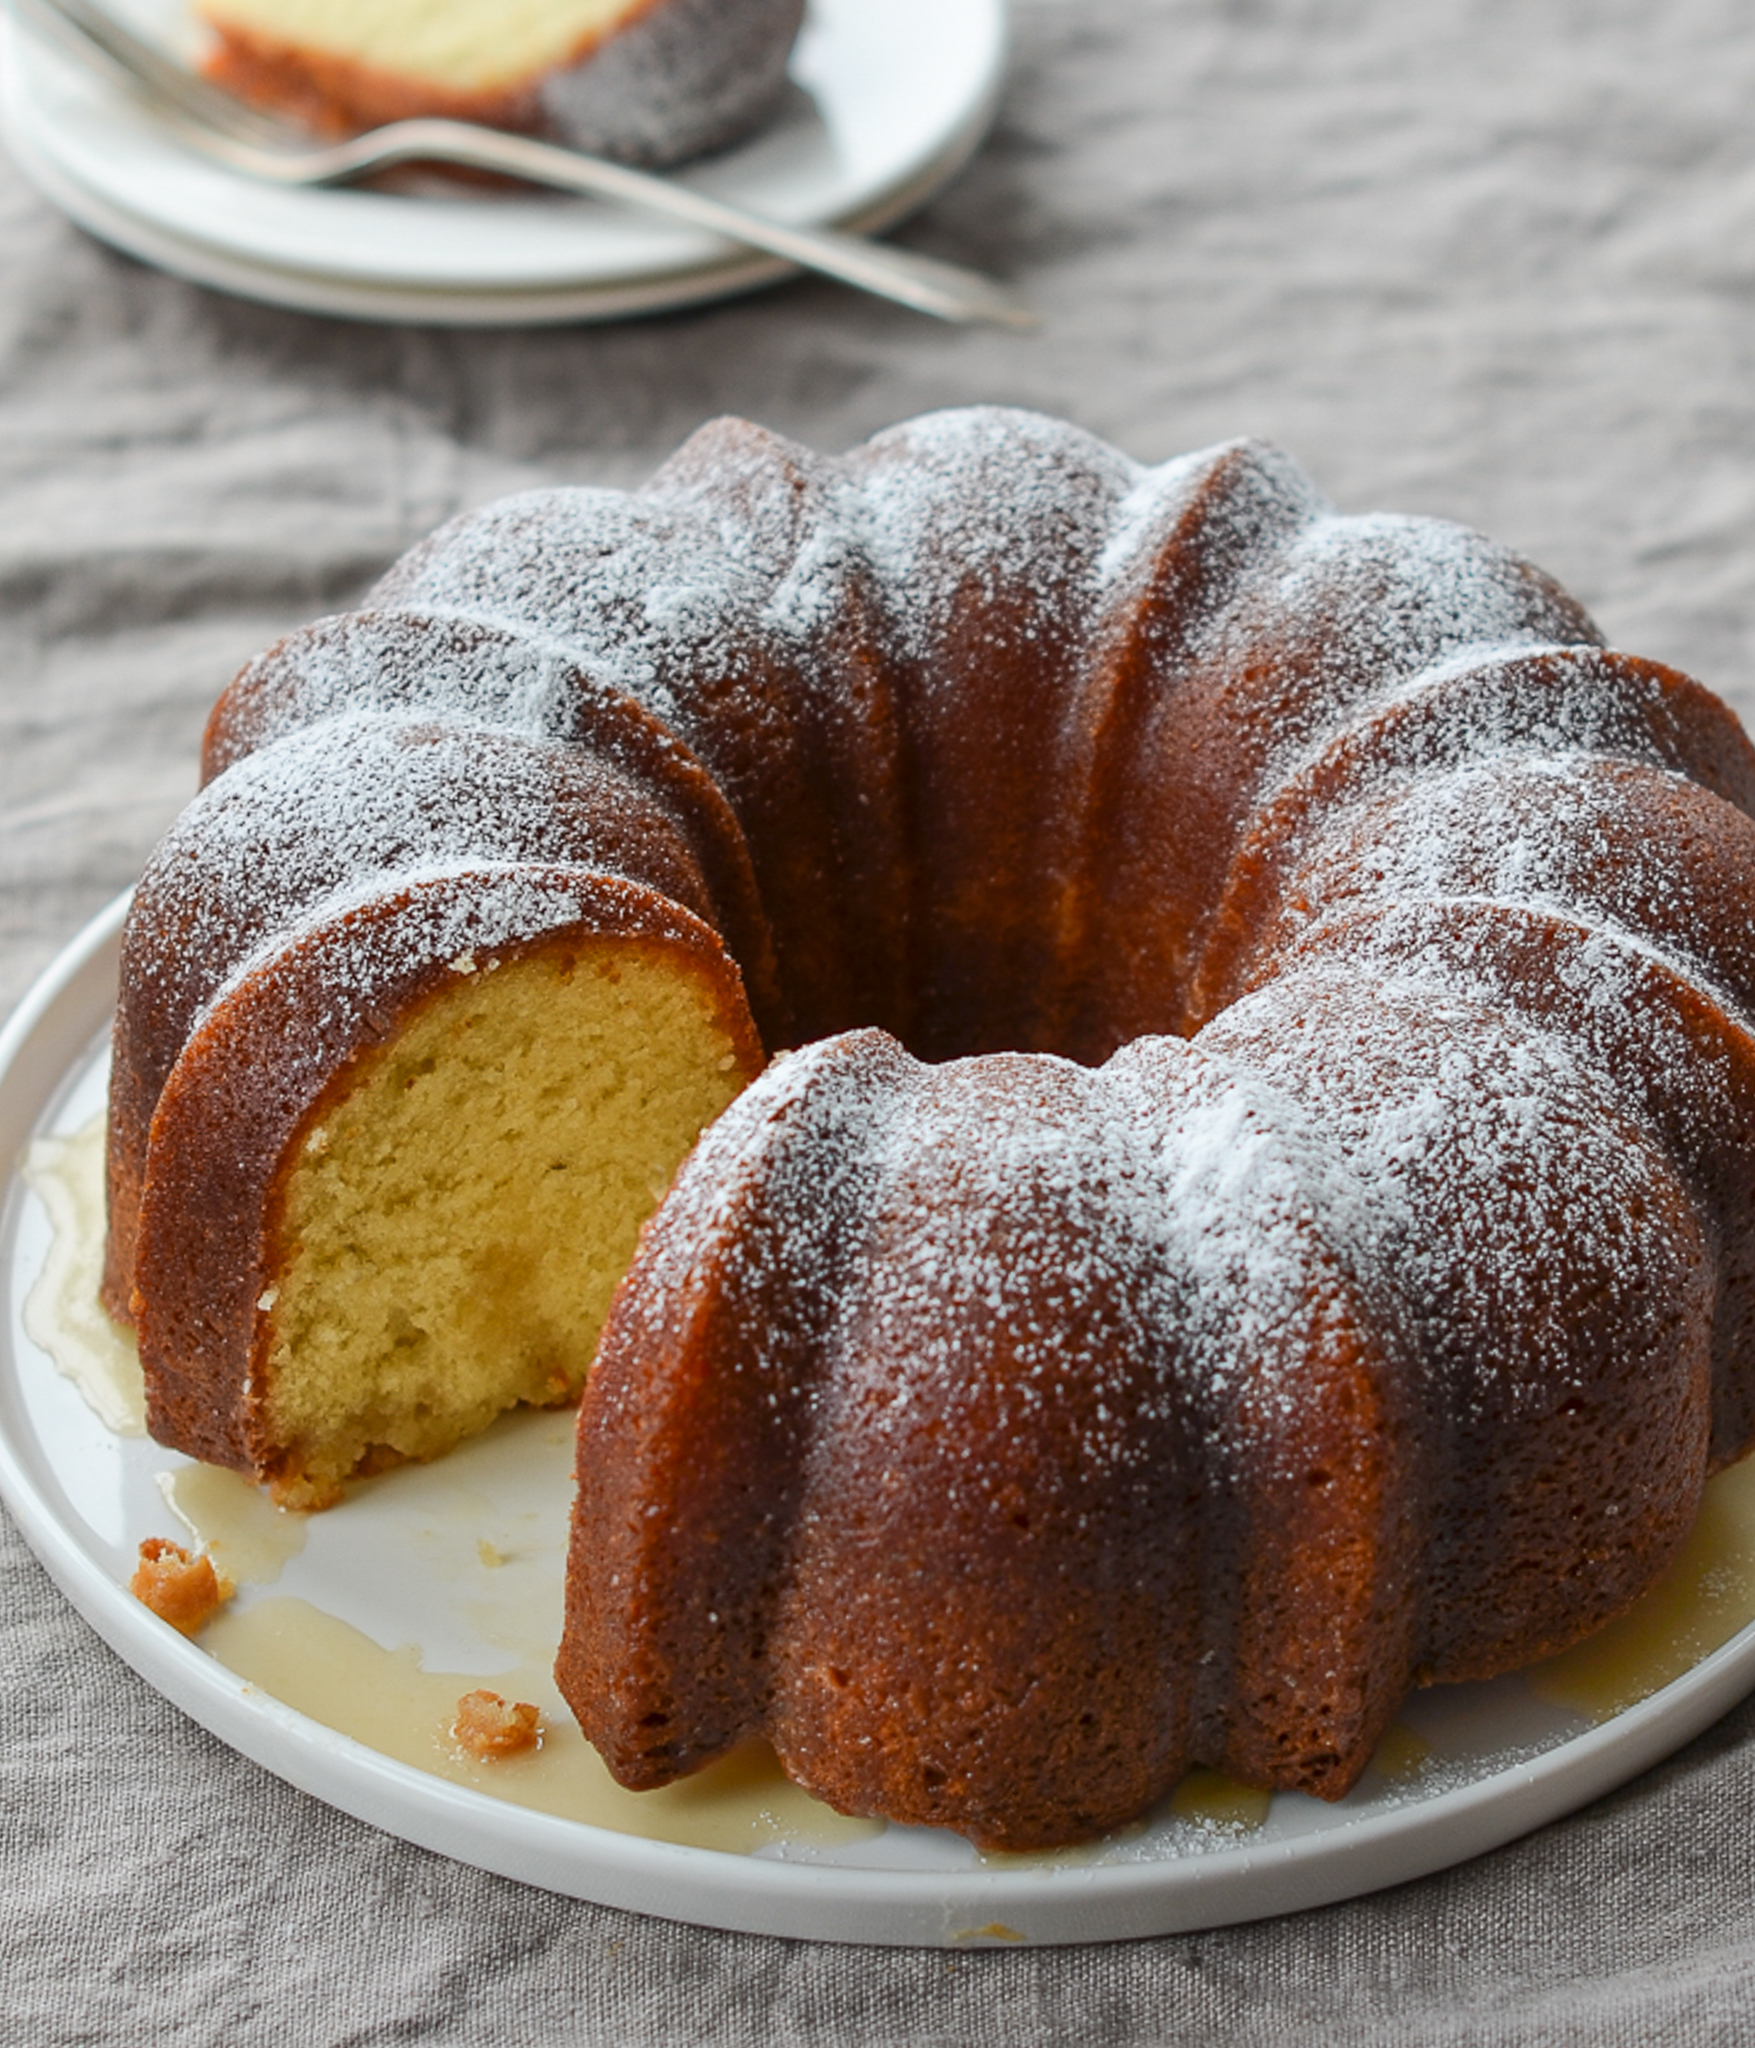 Rum Cake from Scratch - The Best Ever! - Texanerin Baking